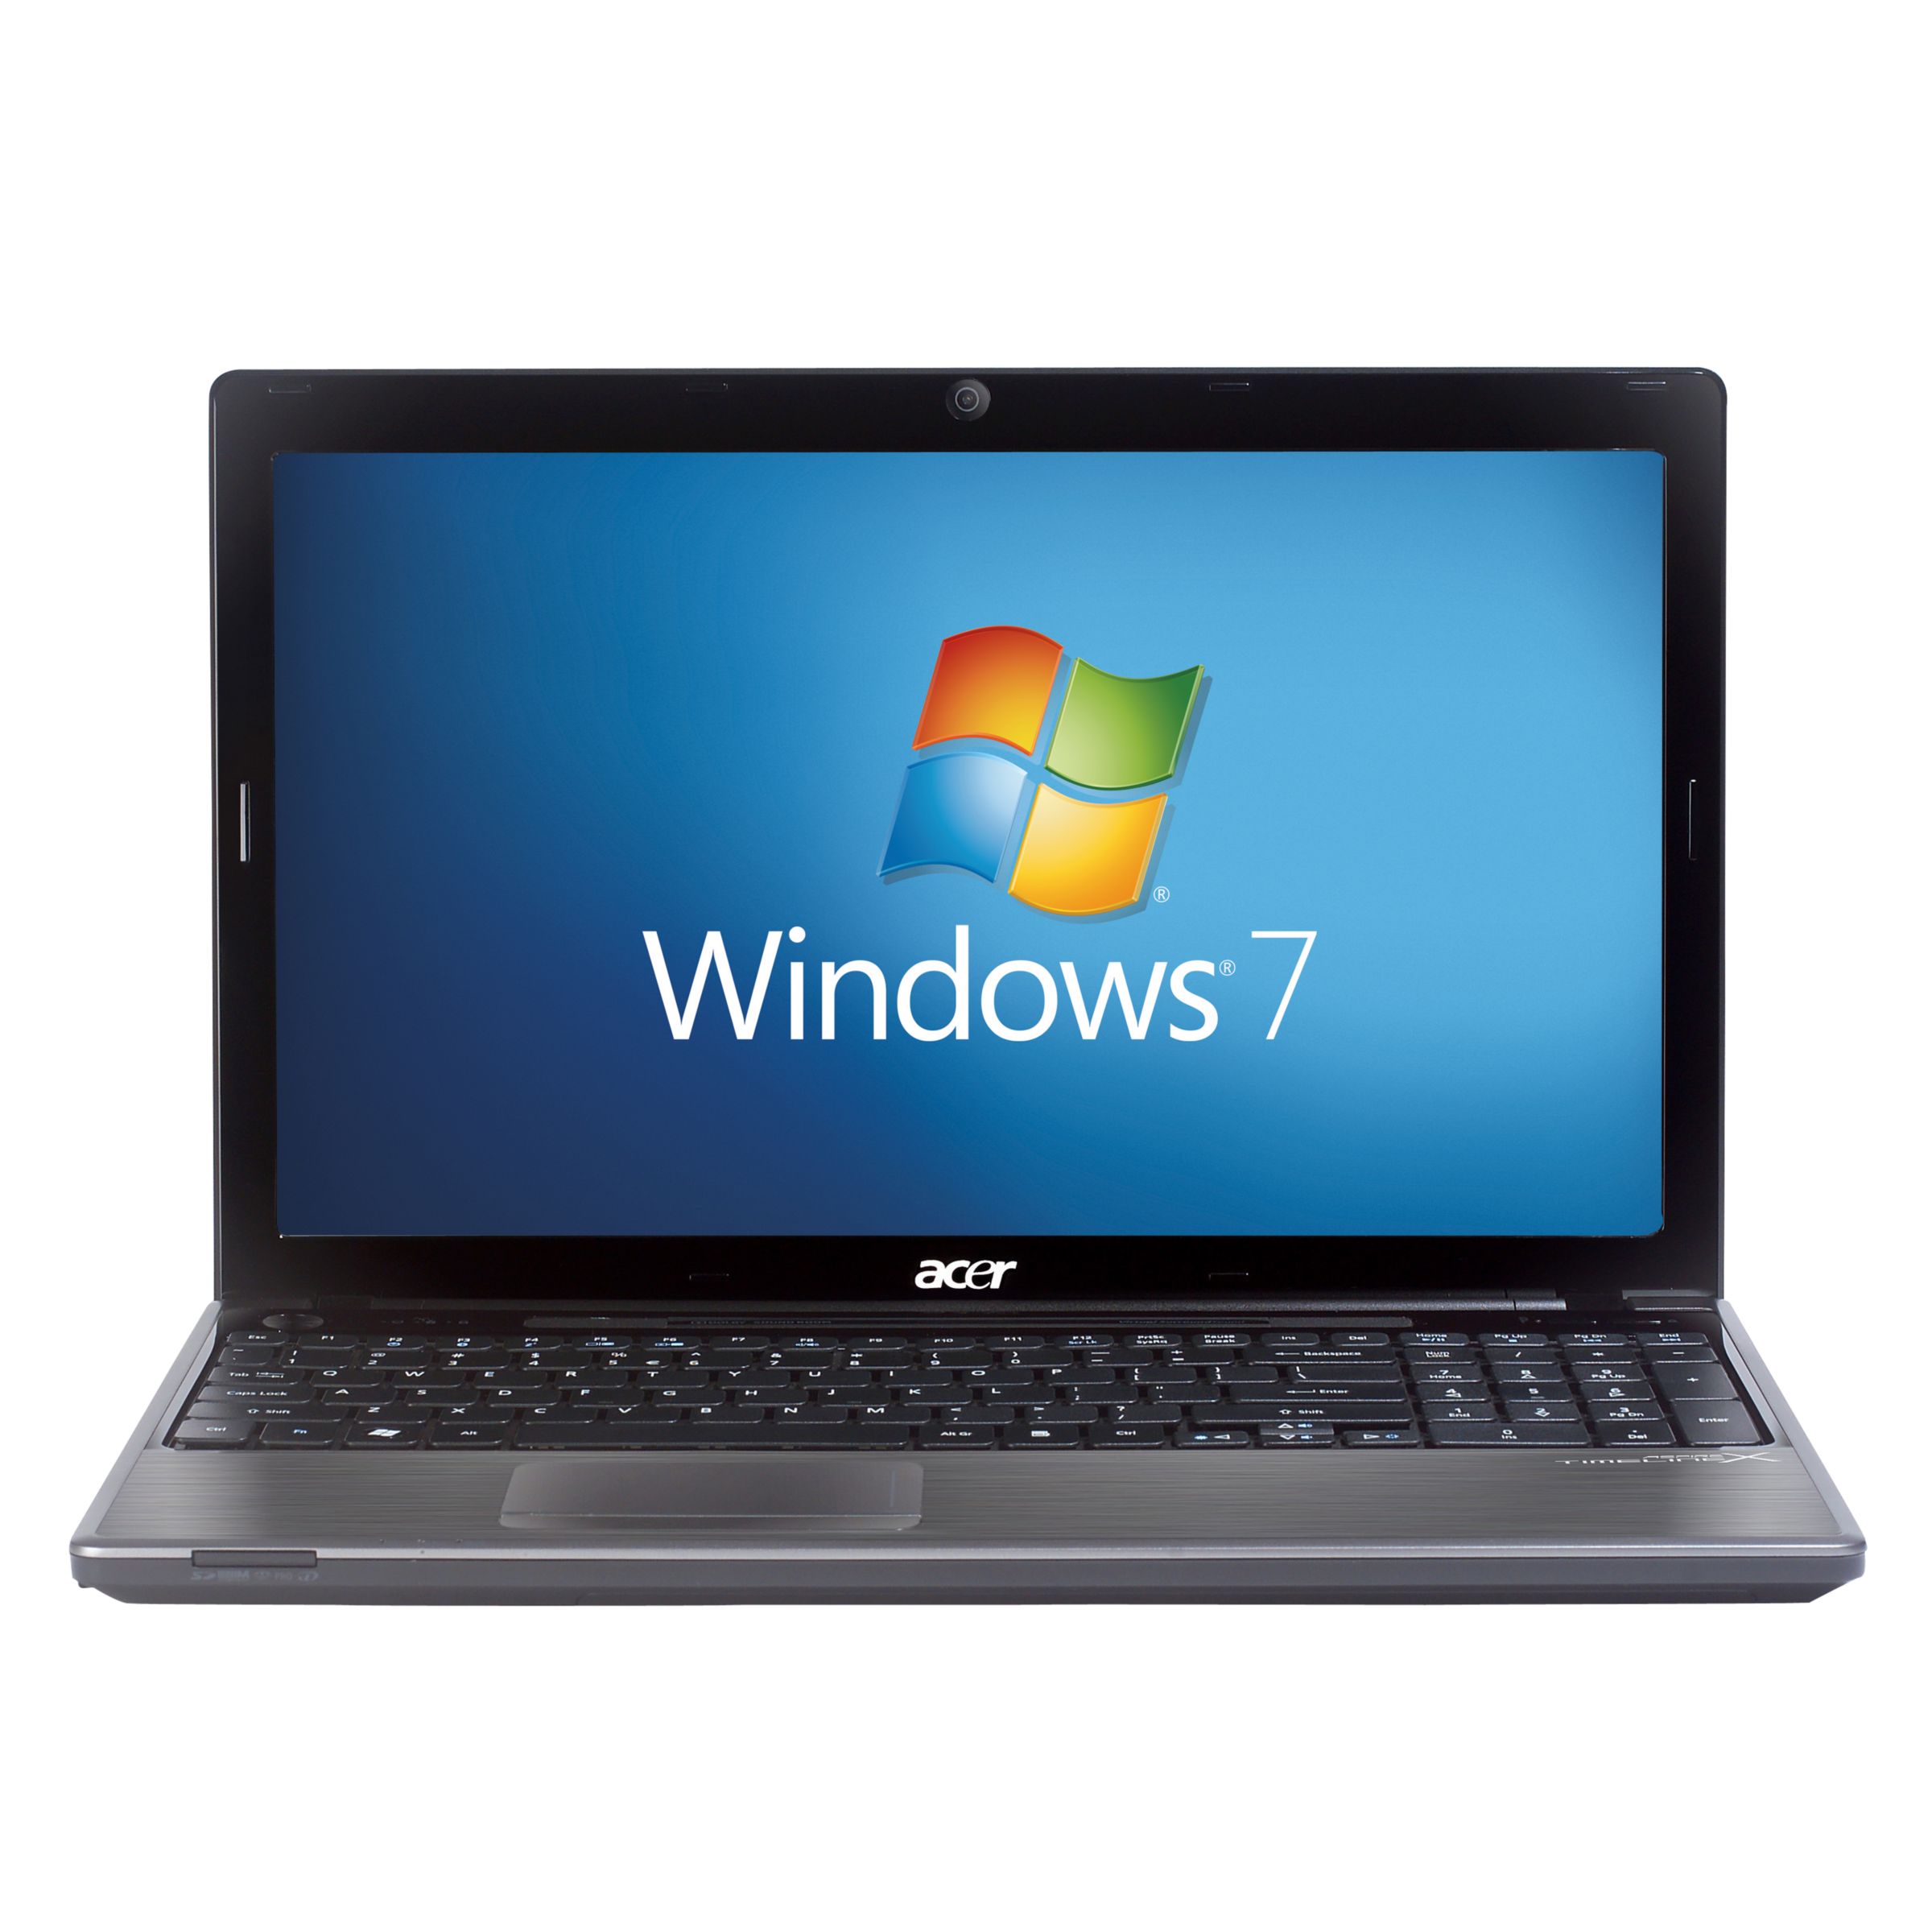 Acer Timeline 5820T Laptop, Intel Core i5, 500GB, 2.53GHz, 4GB RAM with 15.6 Inch Display at John Lewis